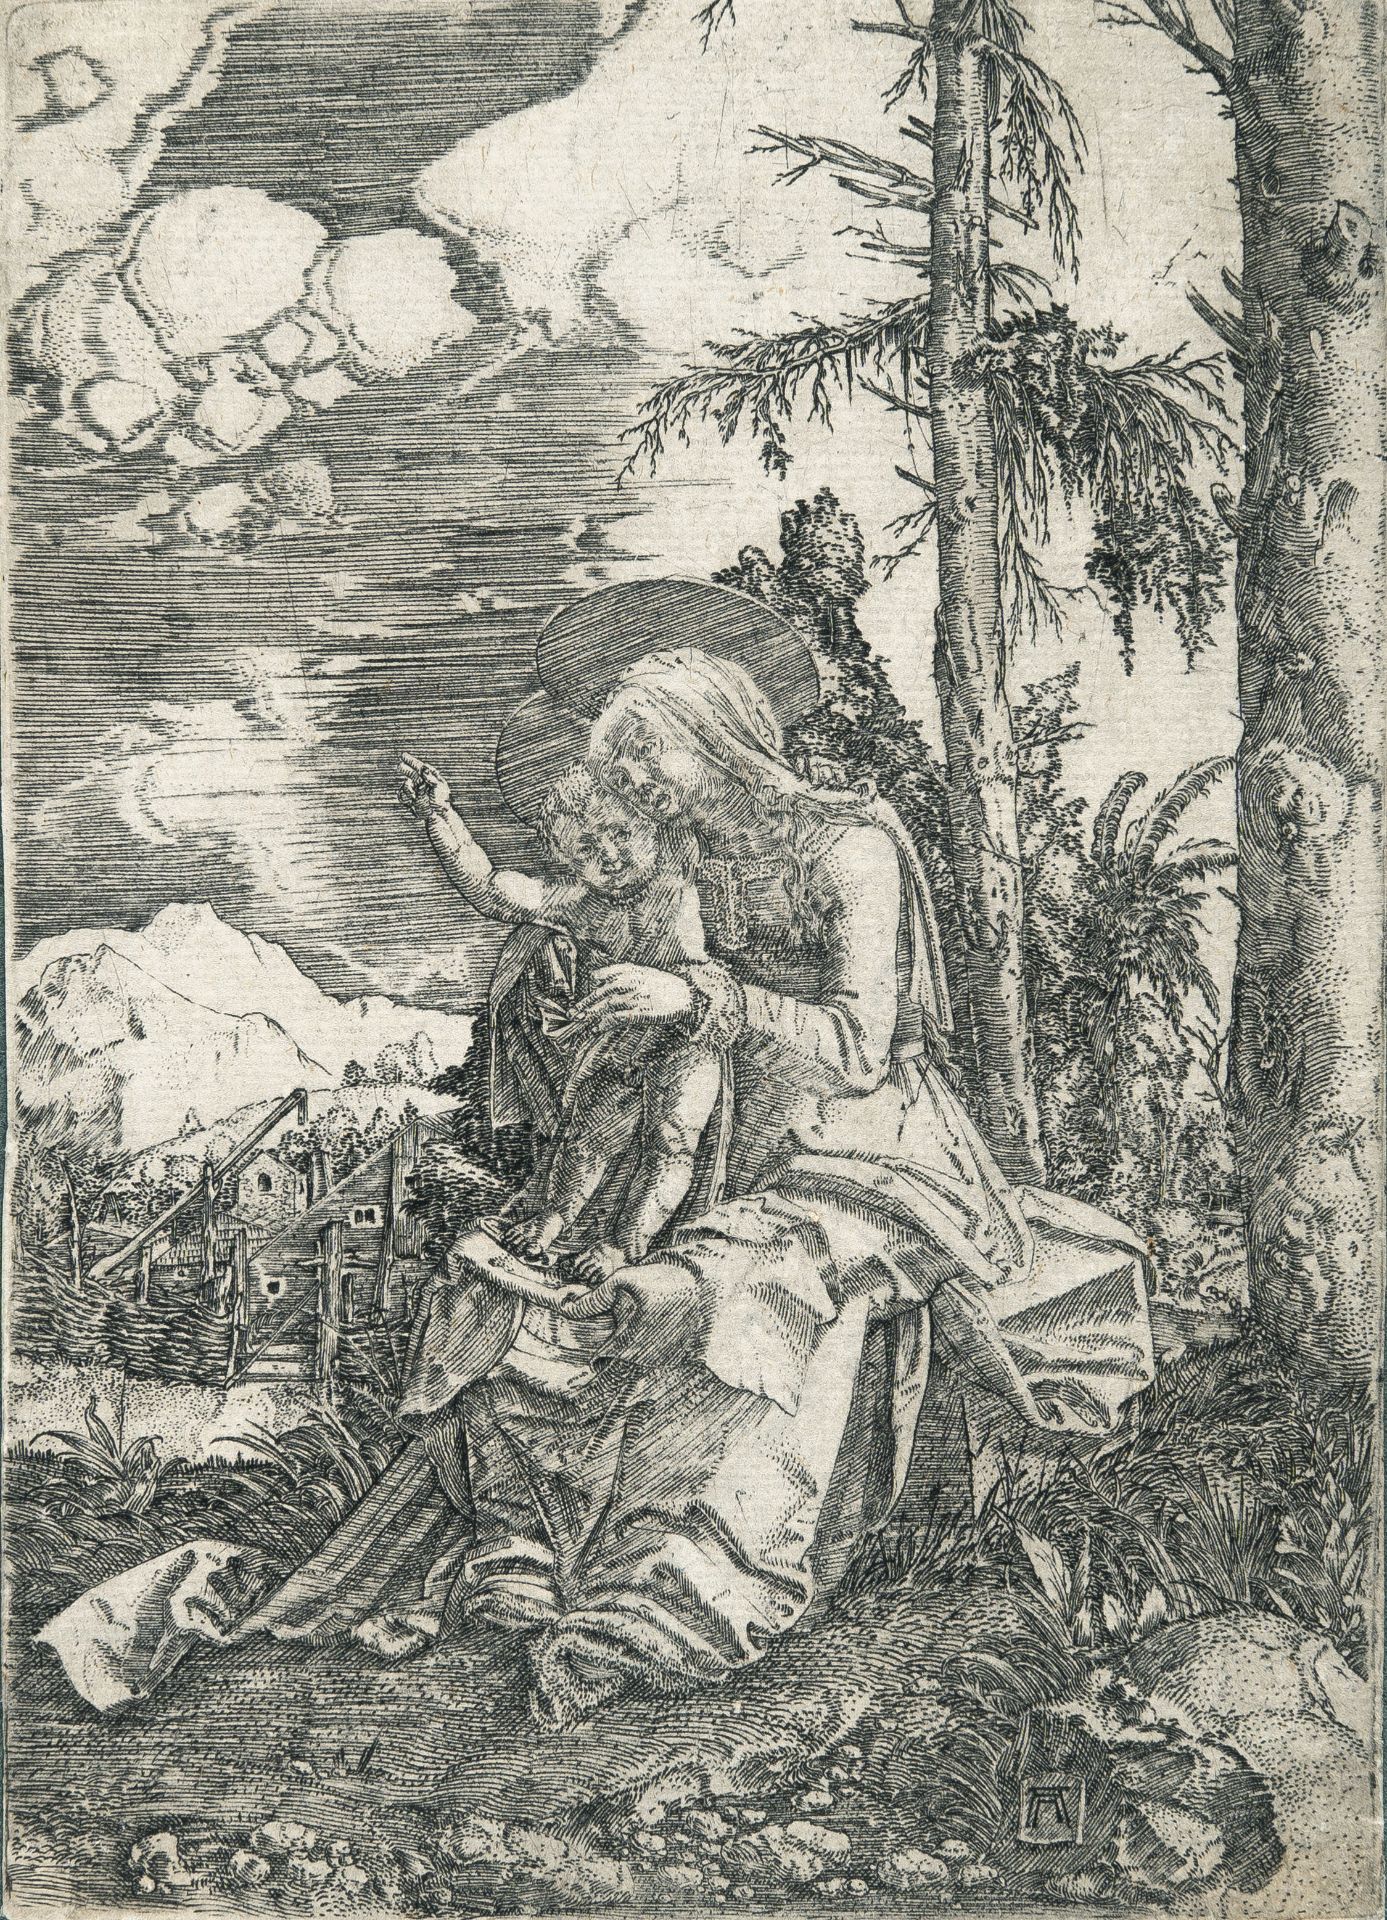 Albrecht Altdorfer, The Virgin with the blessing Christ Child.Engraving on laid paper with watermark